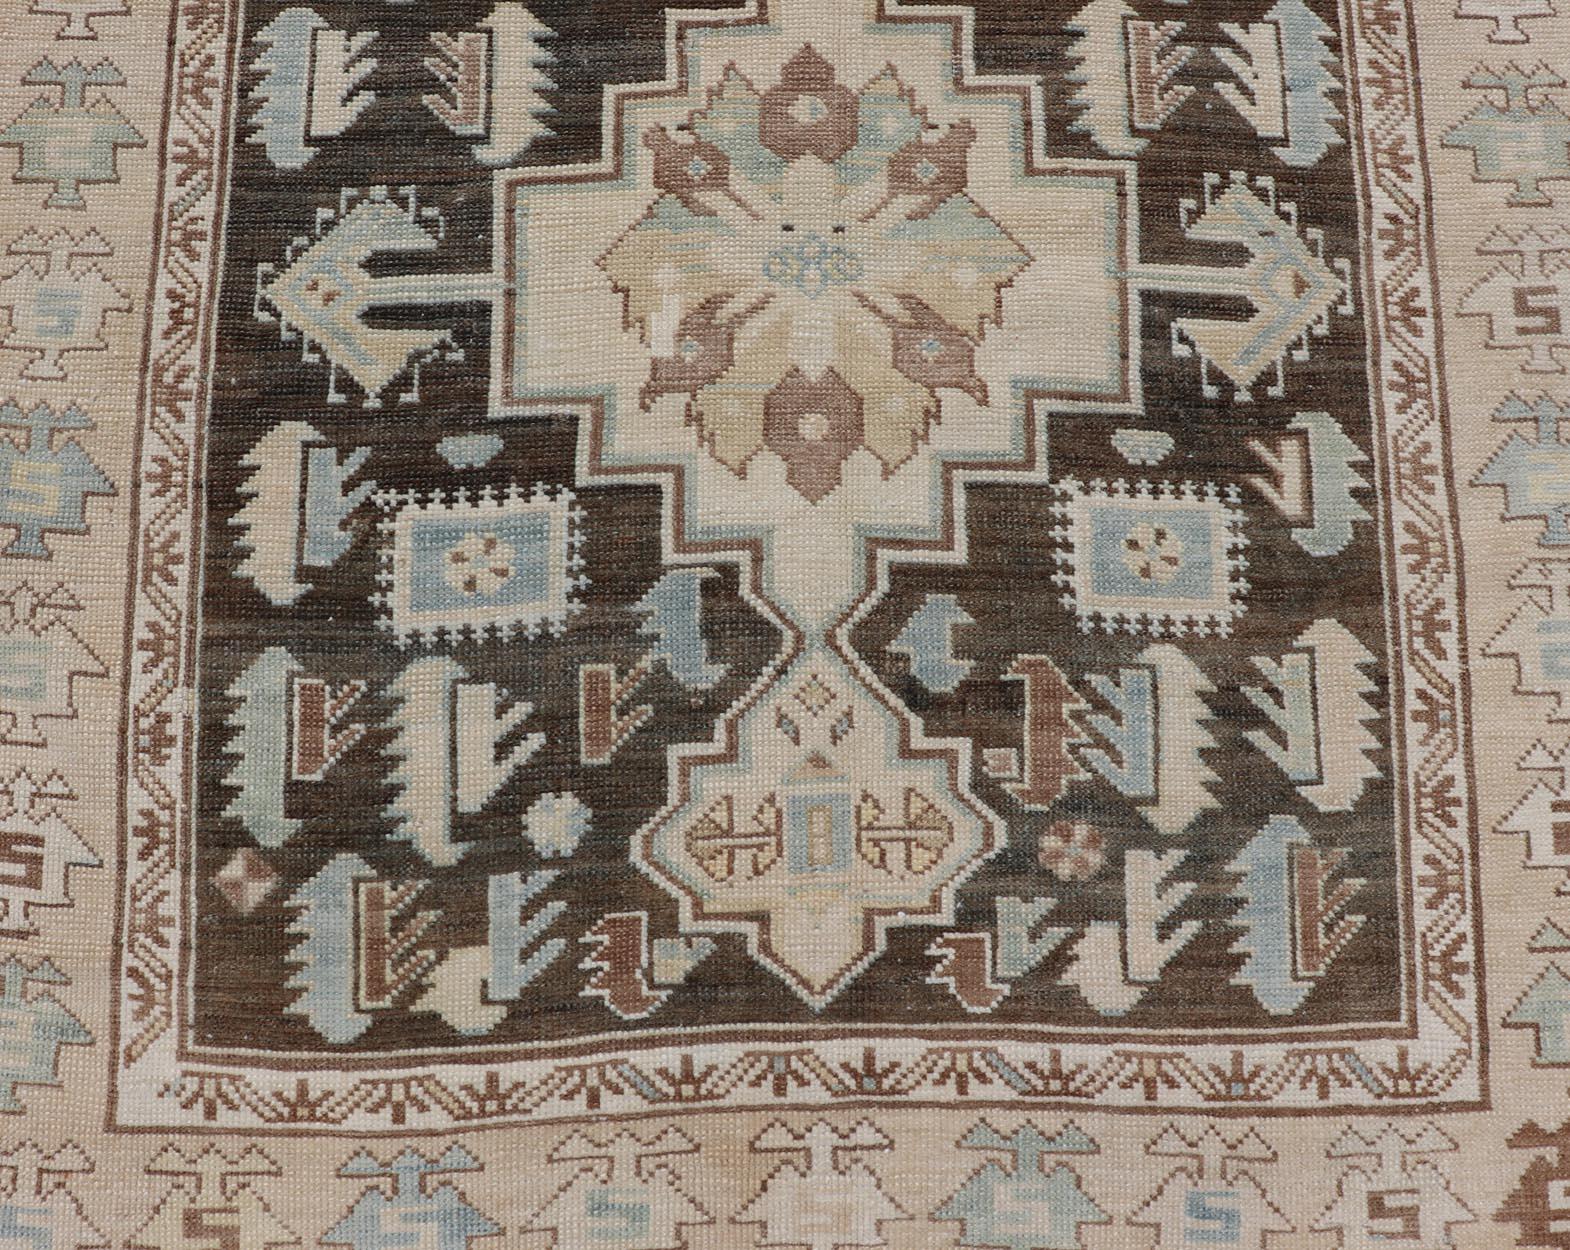 Antique Kazak Runner with Geometric Design and Medallions on a Brown Field 2